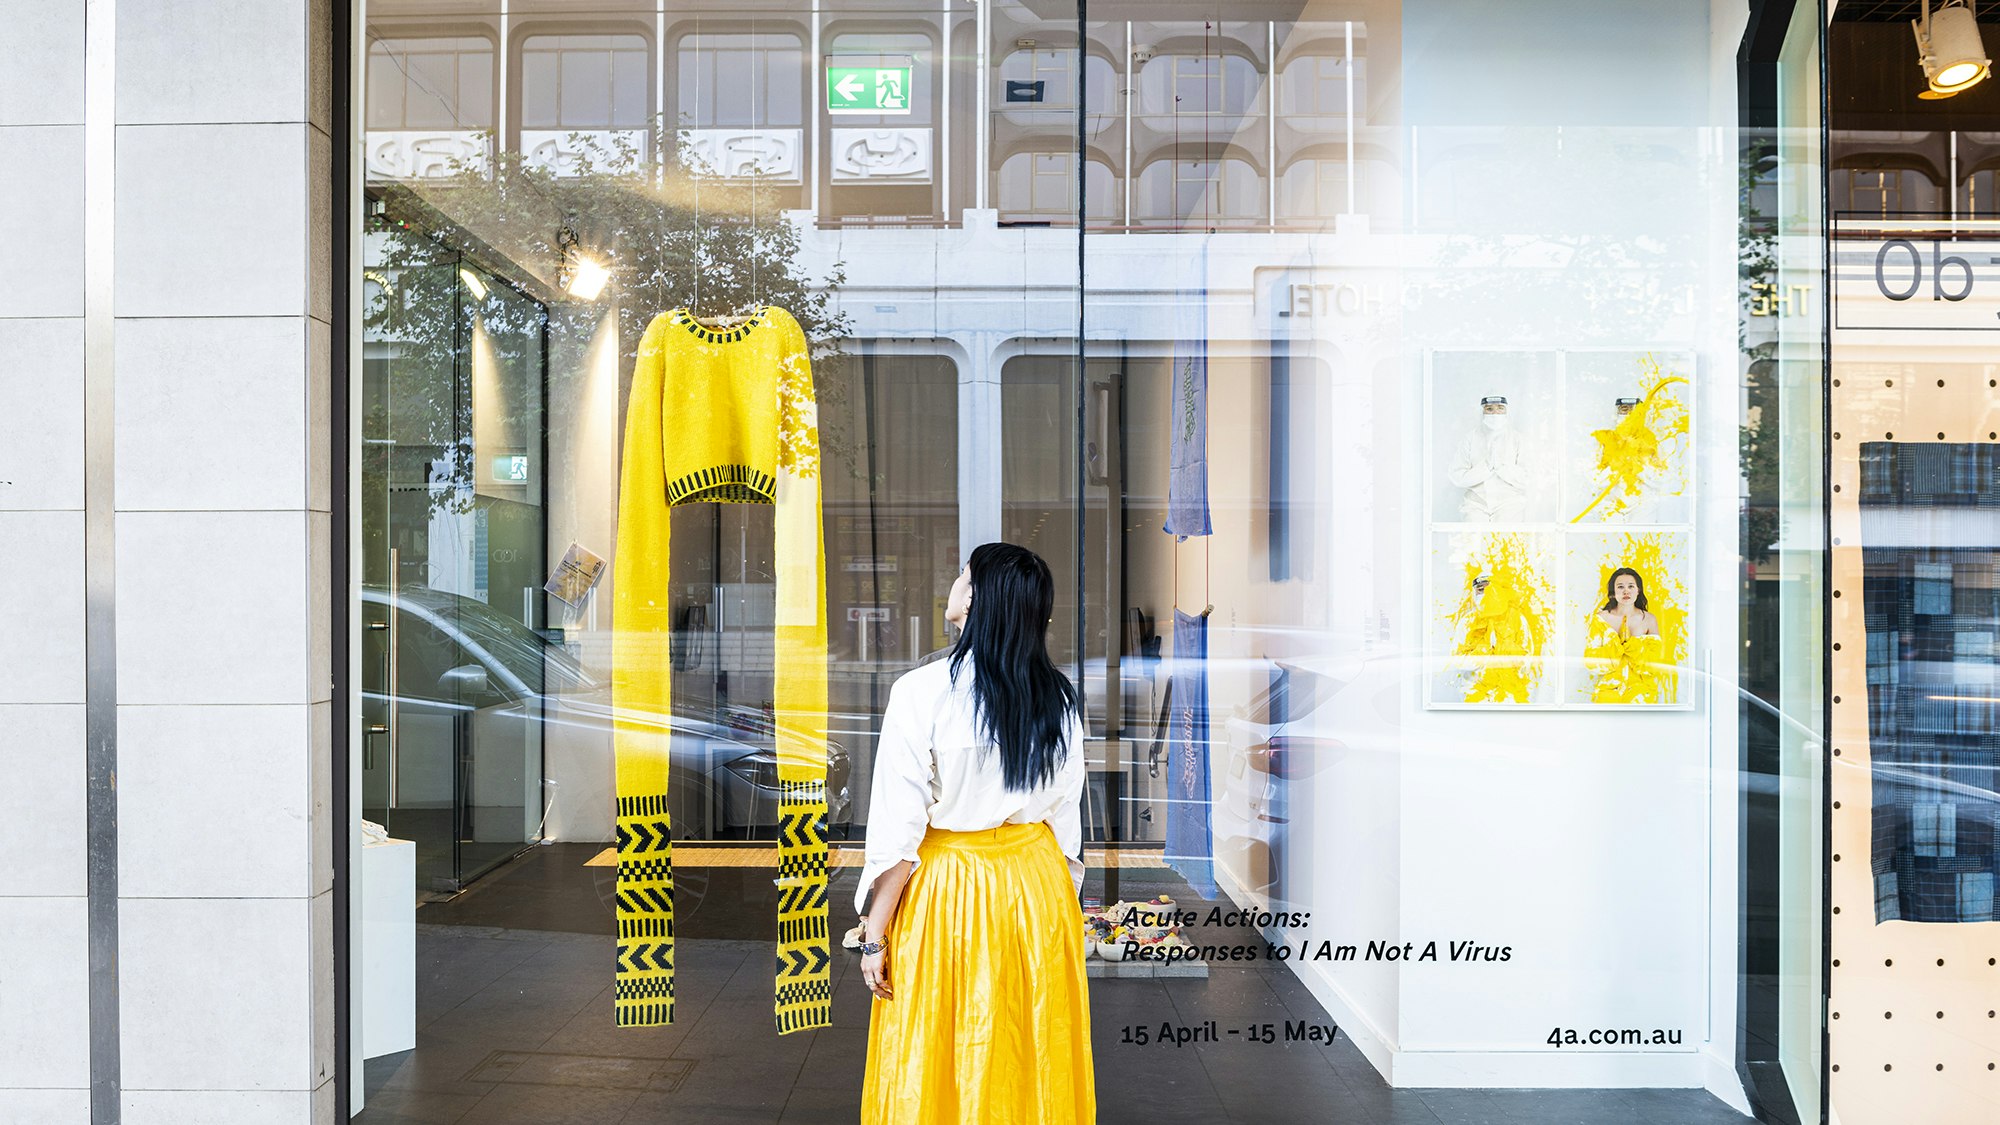 A woman with long black hair in a white blouse and yellow full-length skirt stands on a street outside a gallery glass front, looking at a yellow knitted sweater with sleeves knitted to be 1.5 metres long. The decal sign on the glass front reads 'Acute Actions: Responses to I Am Not A Virus. 15 April - 15 May'